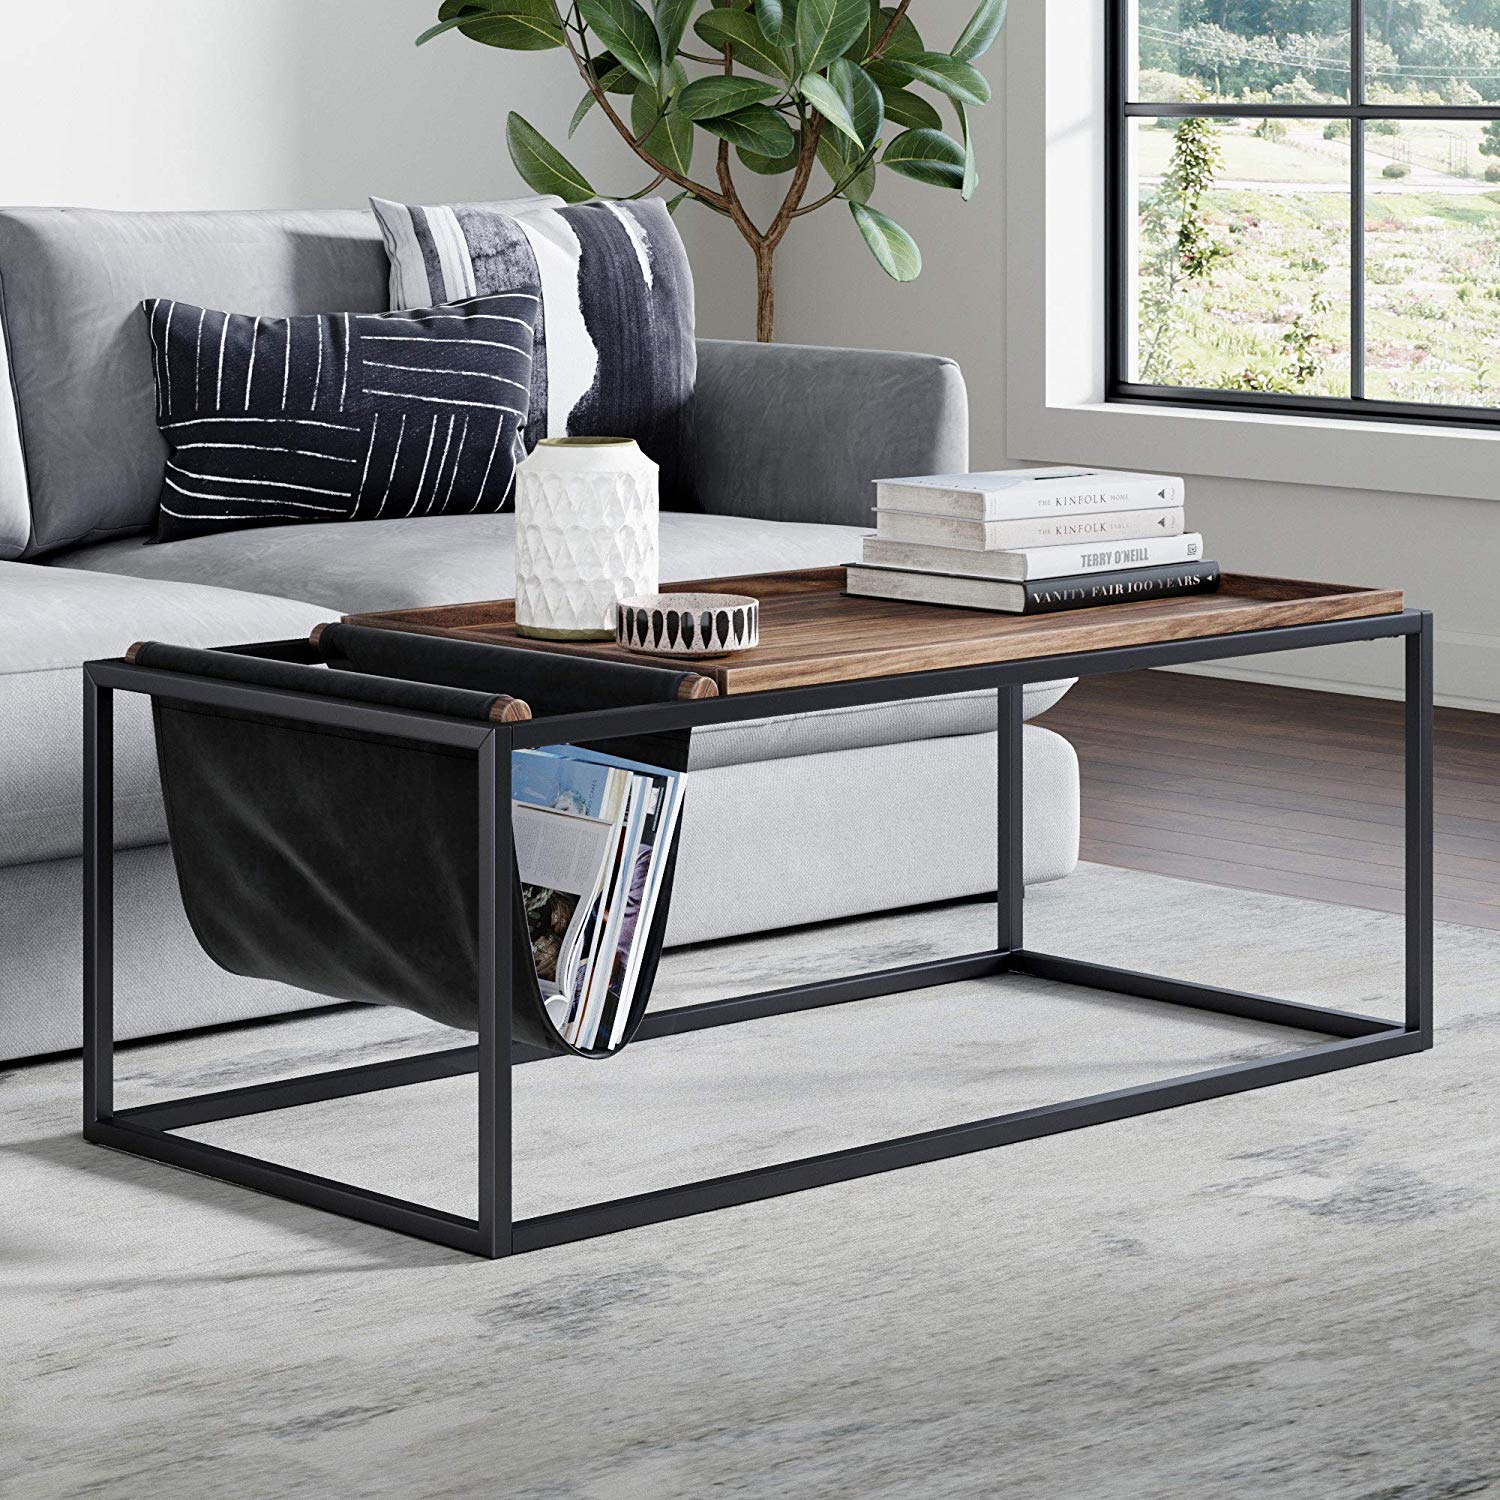 Modern Minimalist Two-Story Coffee Table Living Room Coffee Desk with Sturdy Steel Legs,Ship from US Warehouse